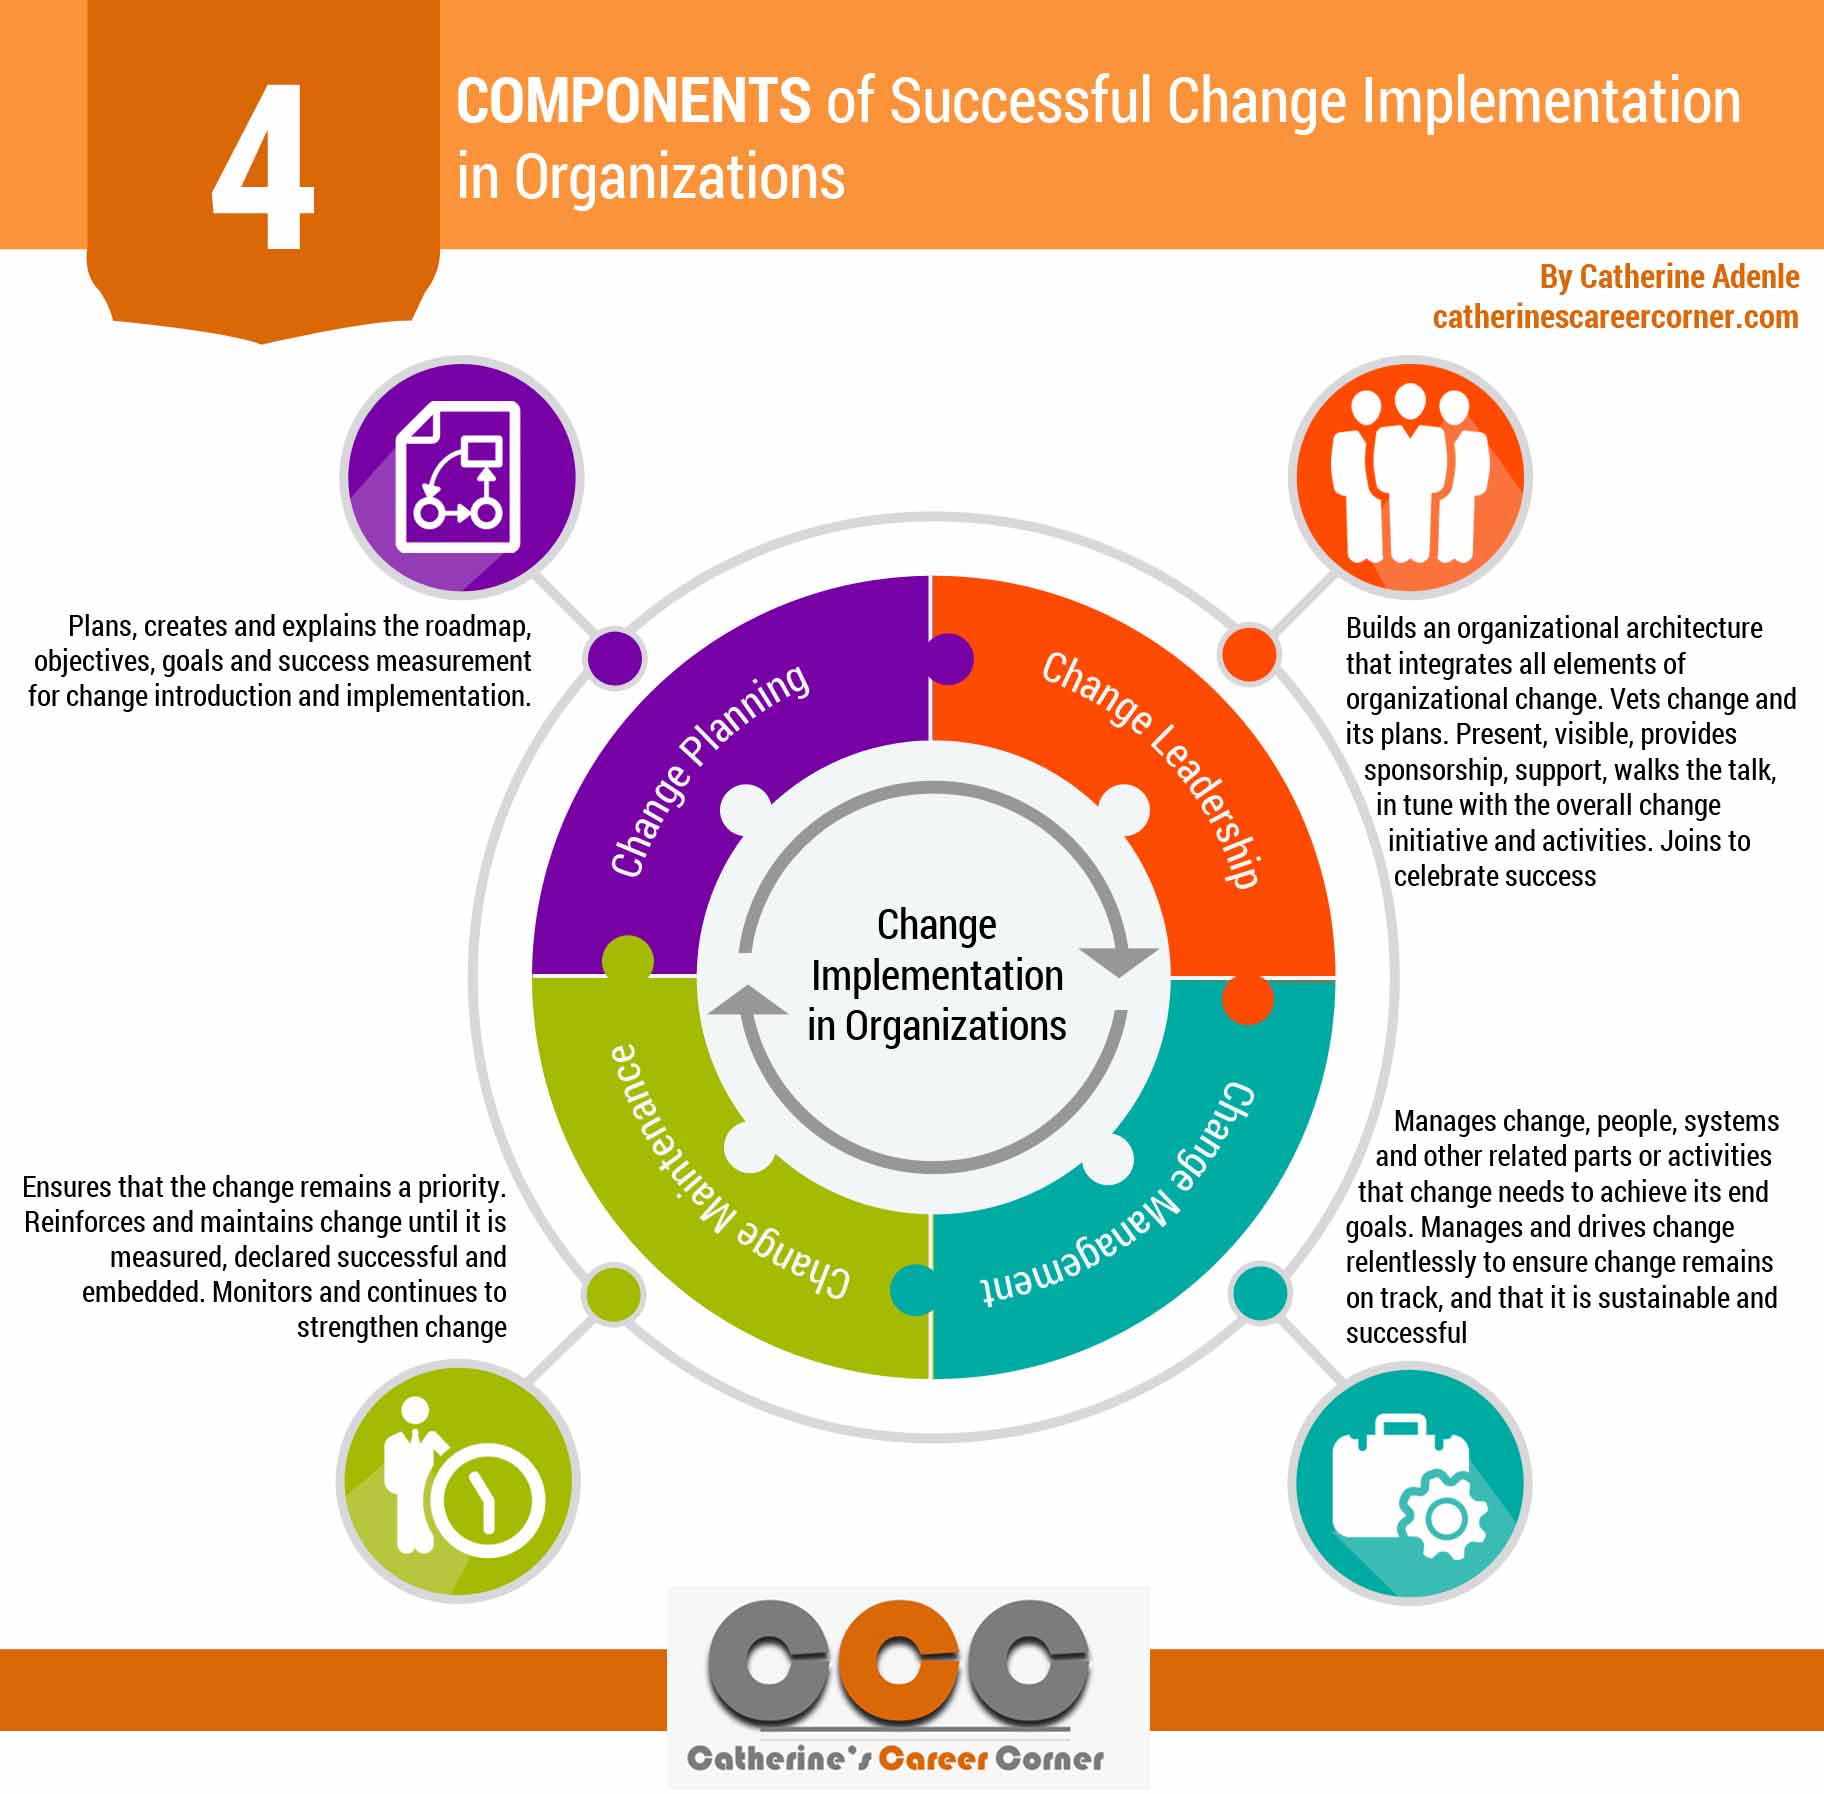 Successful Change Implementation in Organizations (Infographic)